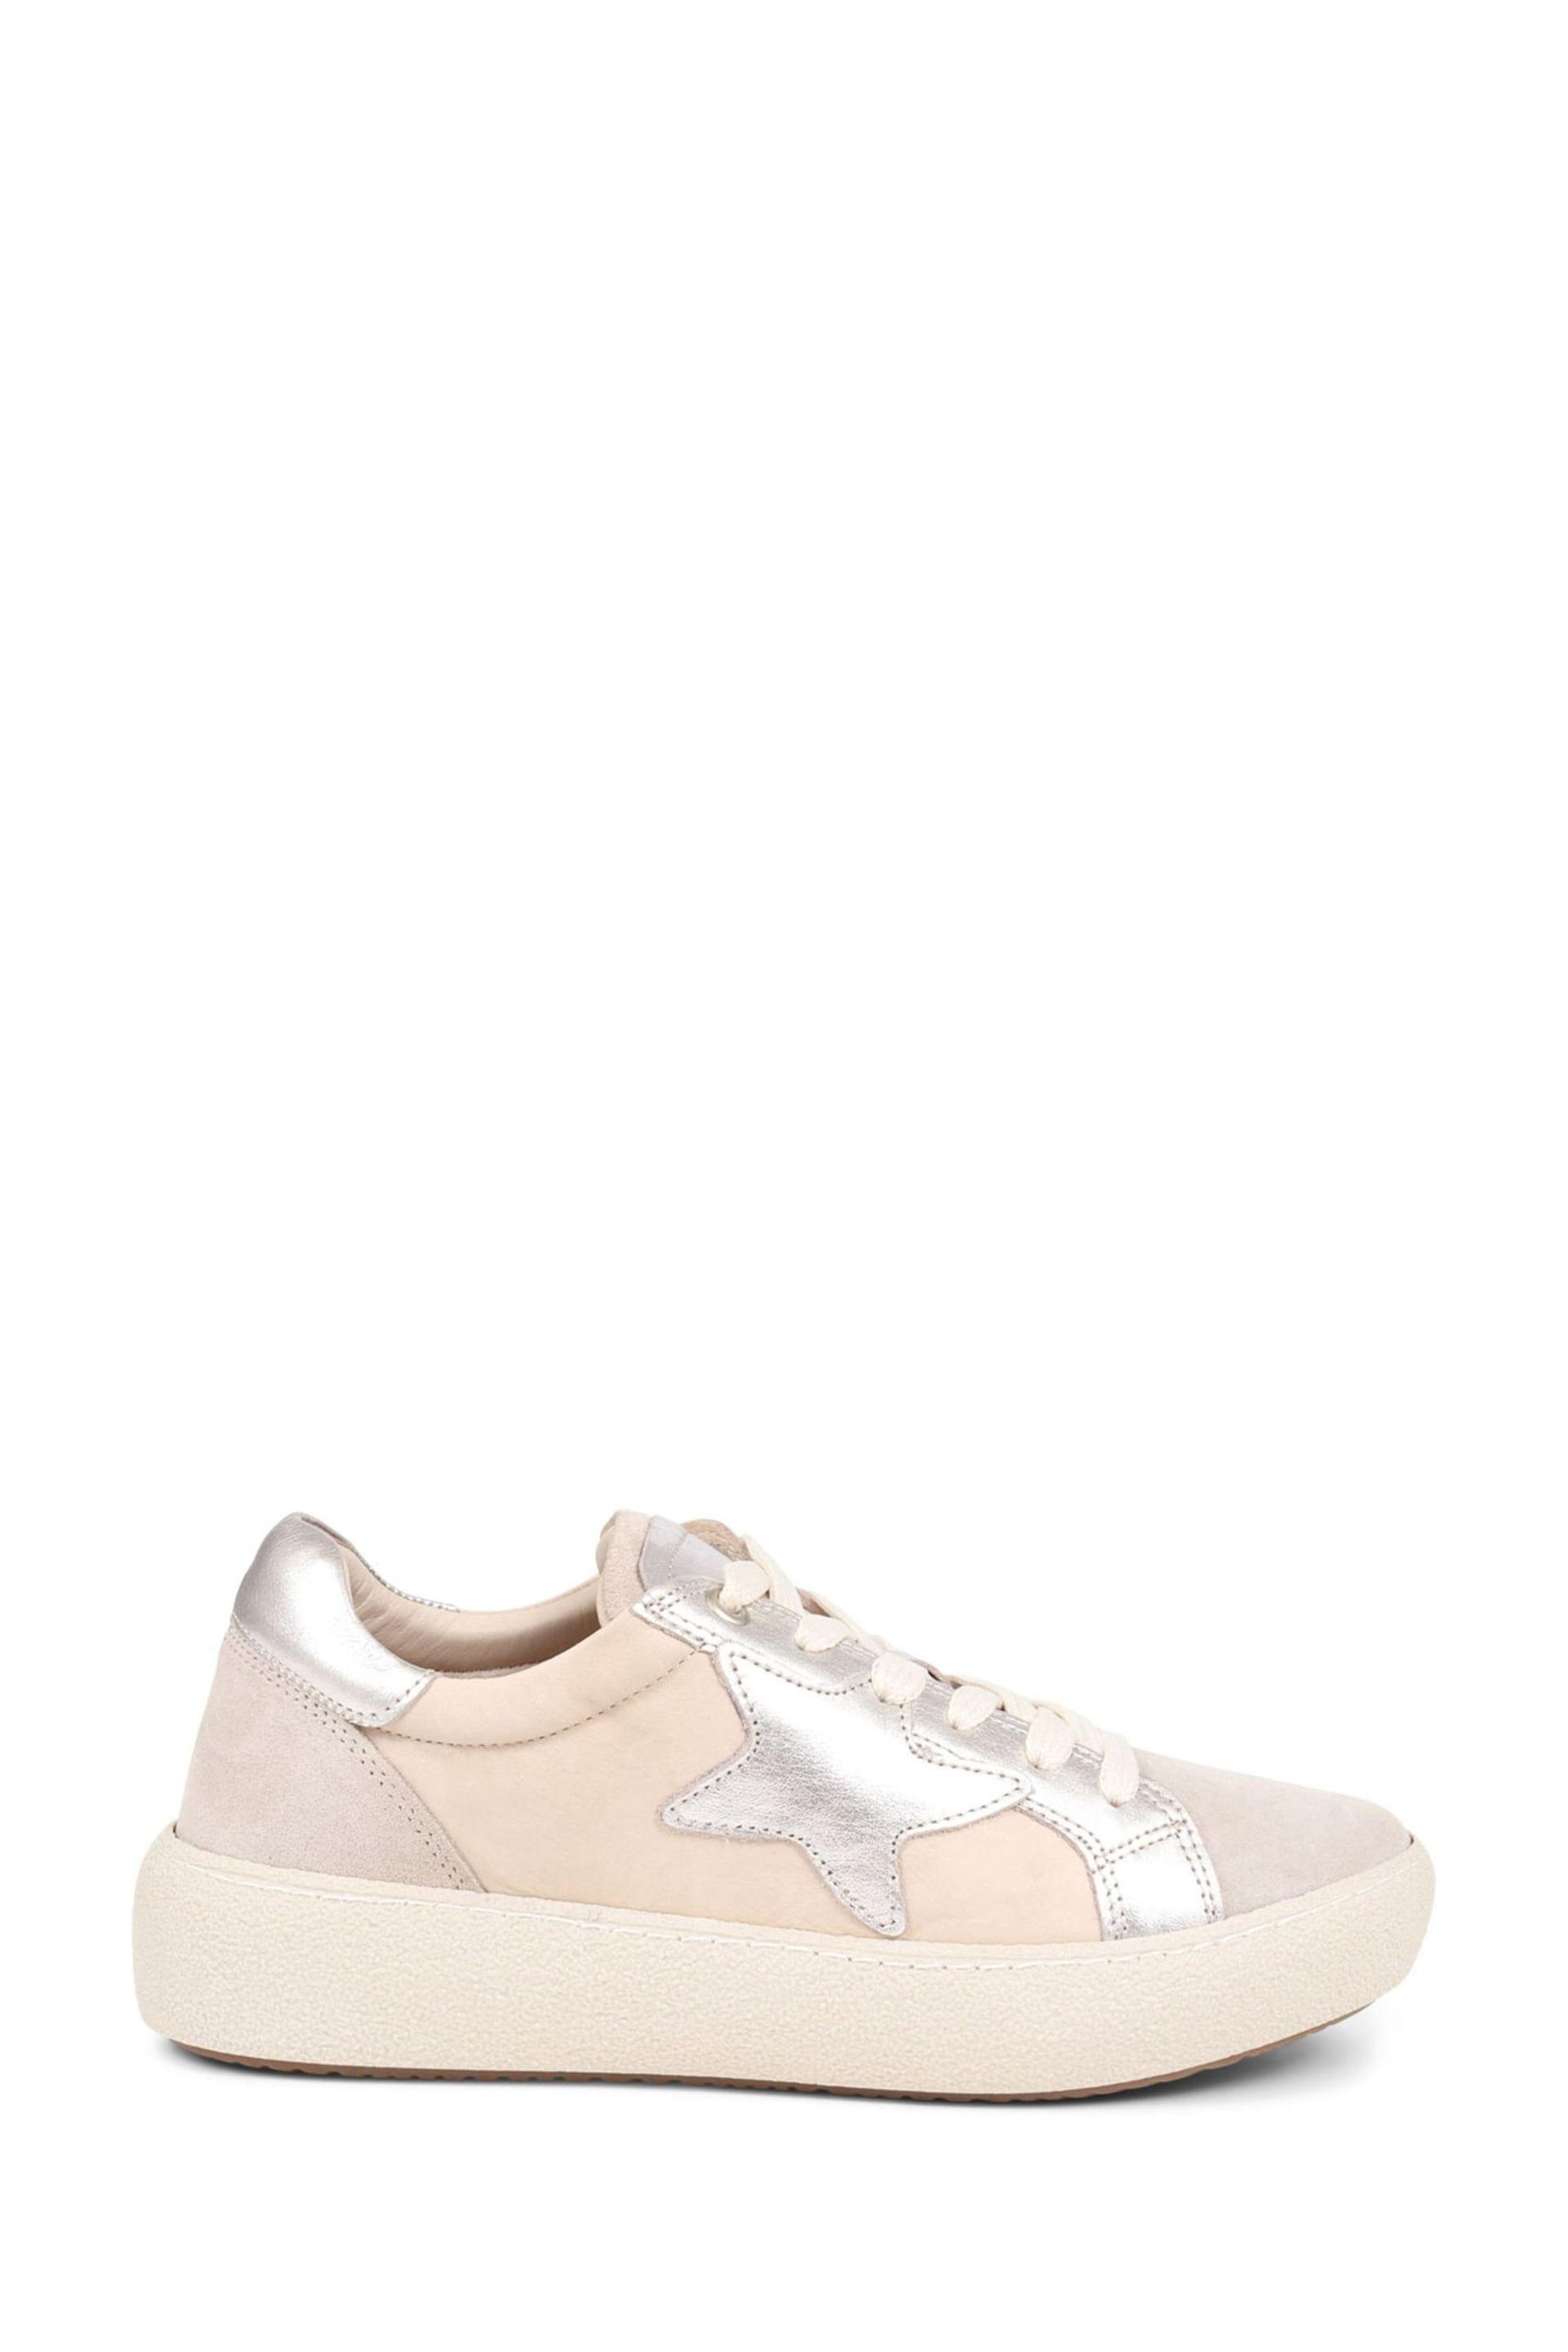 Pavers Van Dal Natural Leather Lace-Up Trainers - Image 1 of 5